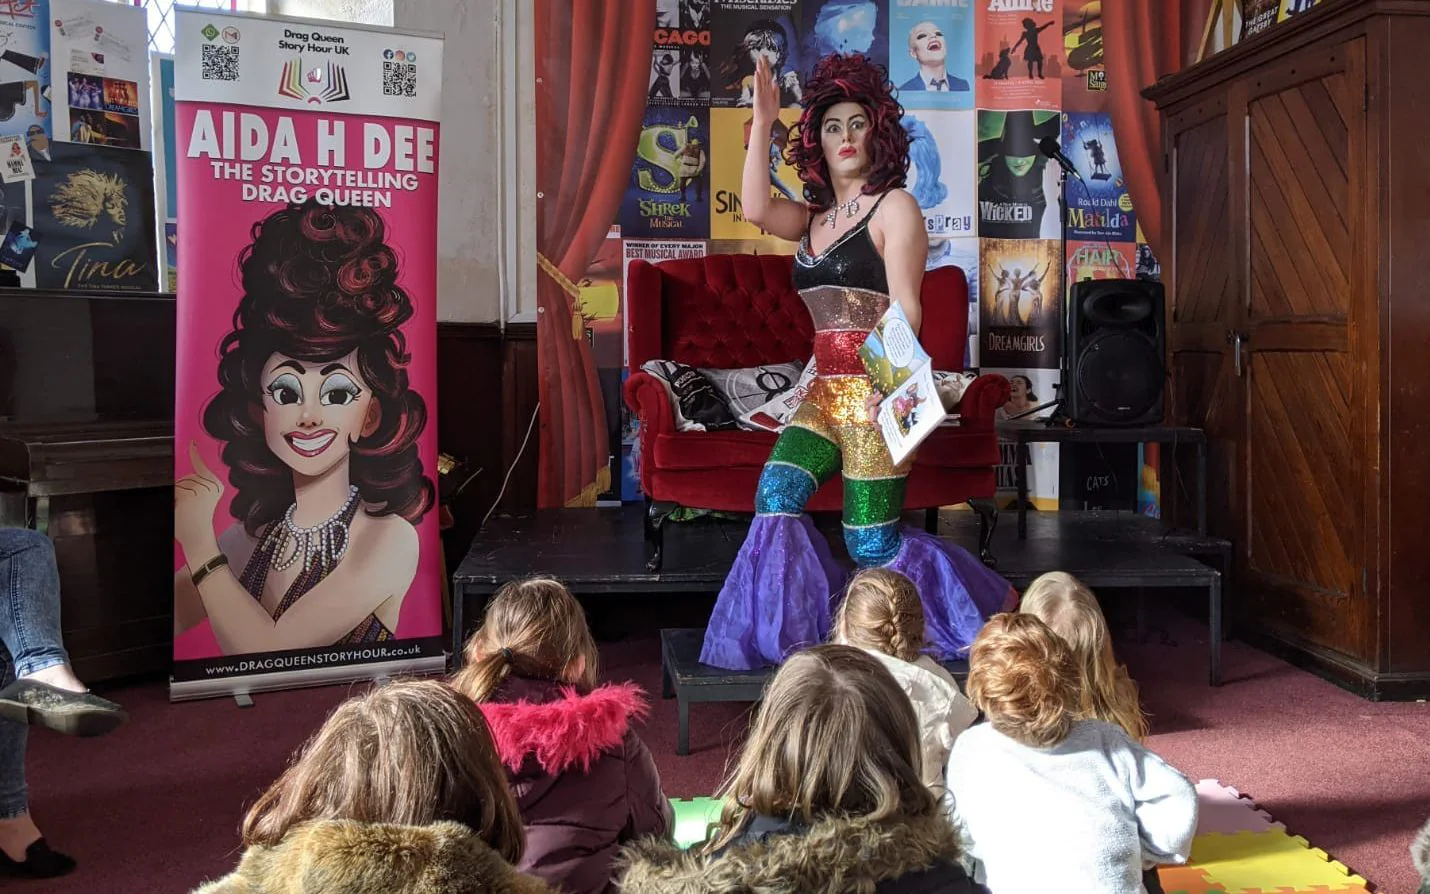 The Dangers Involved When Schools Show Drag Queen Content Without Getting Parental Permission